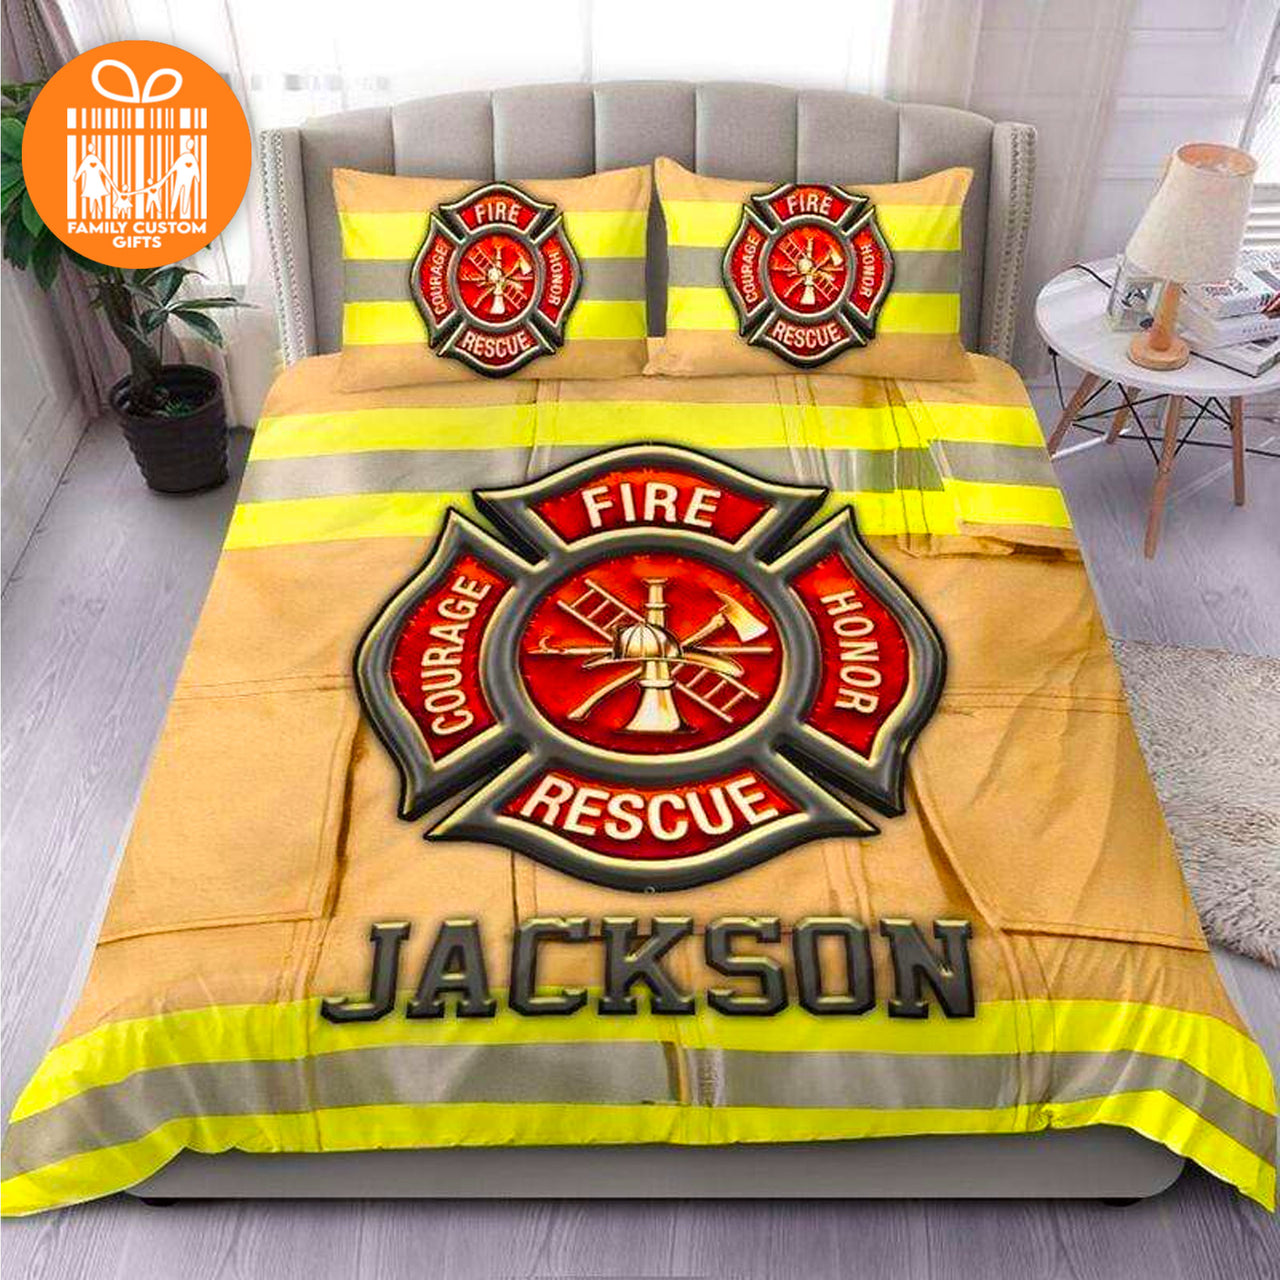 Comforter Firefighter The Fire Department Custom Bedding Set for Kids Teens Adult Personalized Premium Bed Set